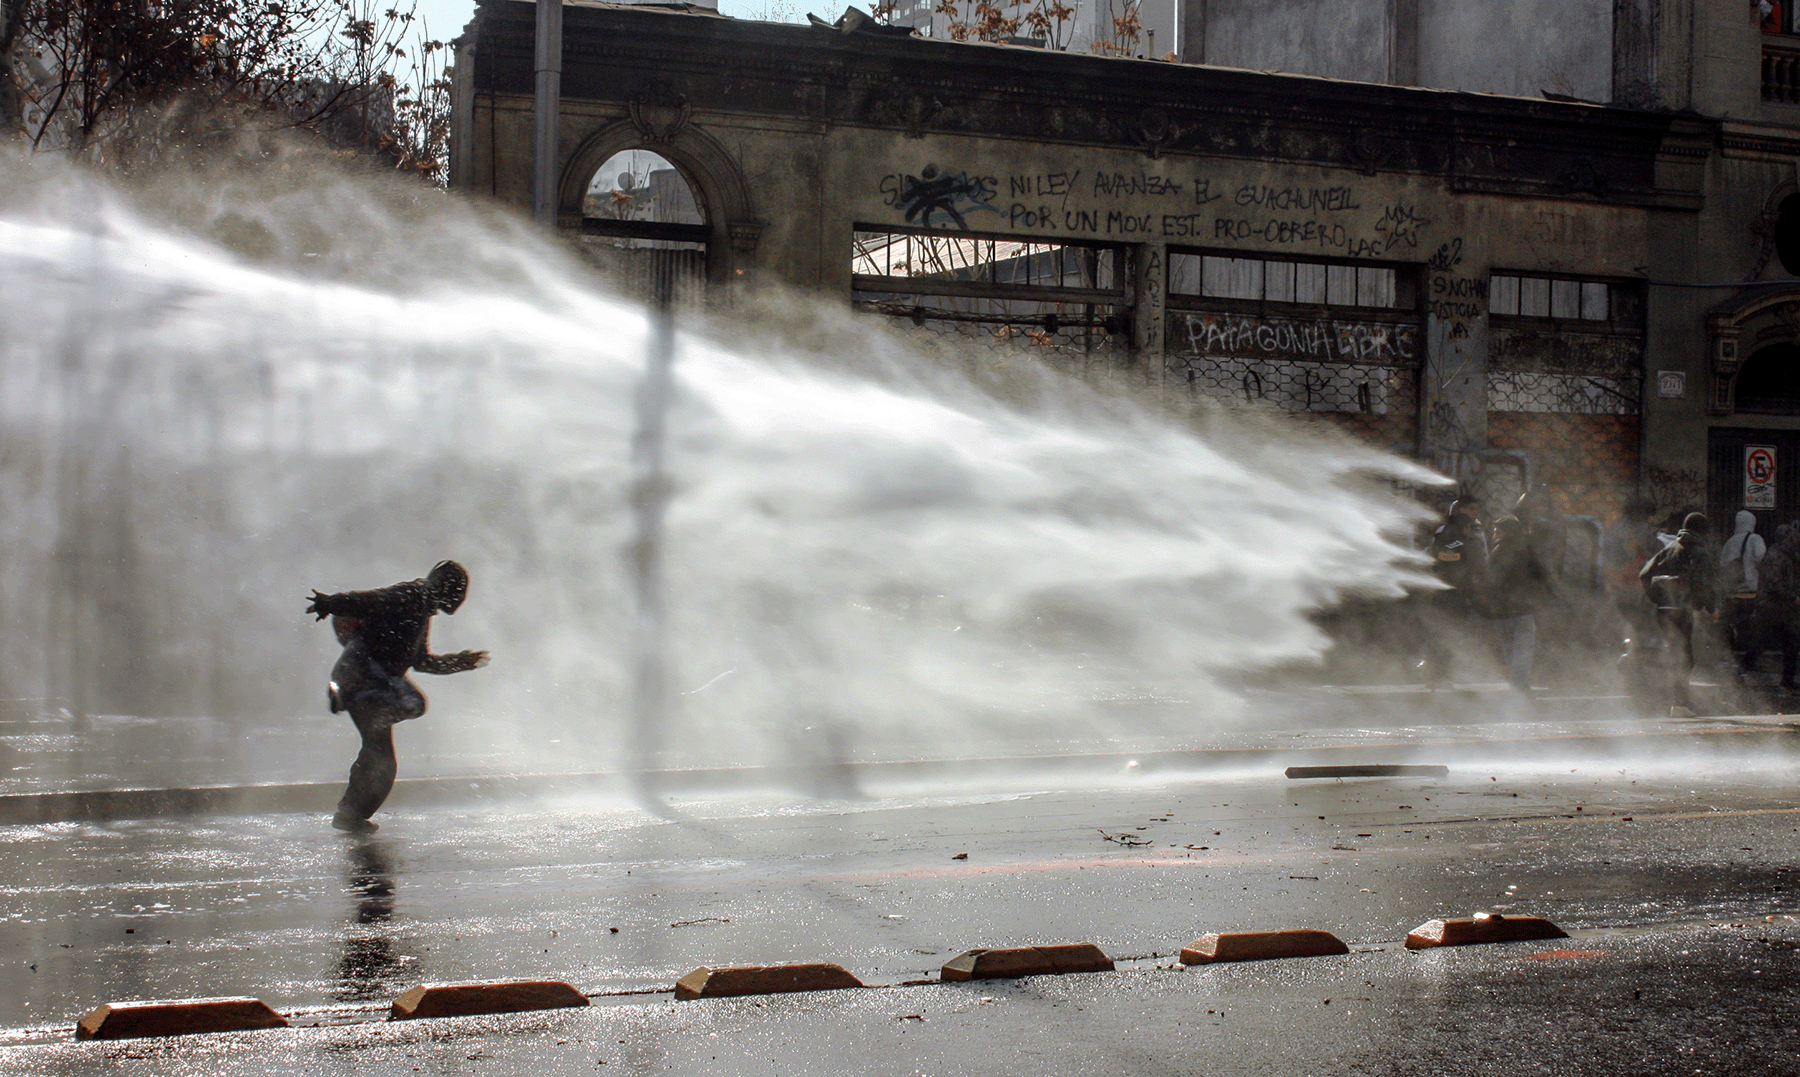 Student's March, police used water cannon against the student protesters in Chile.